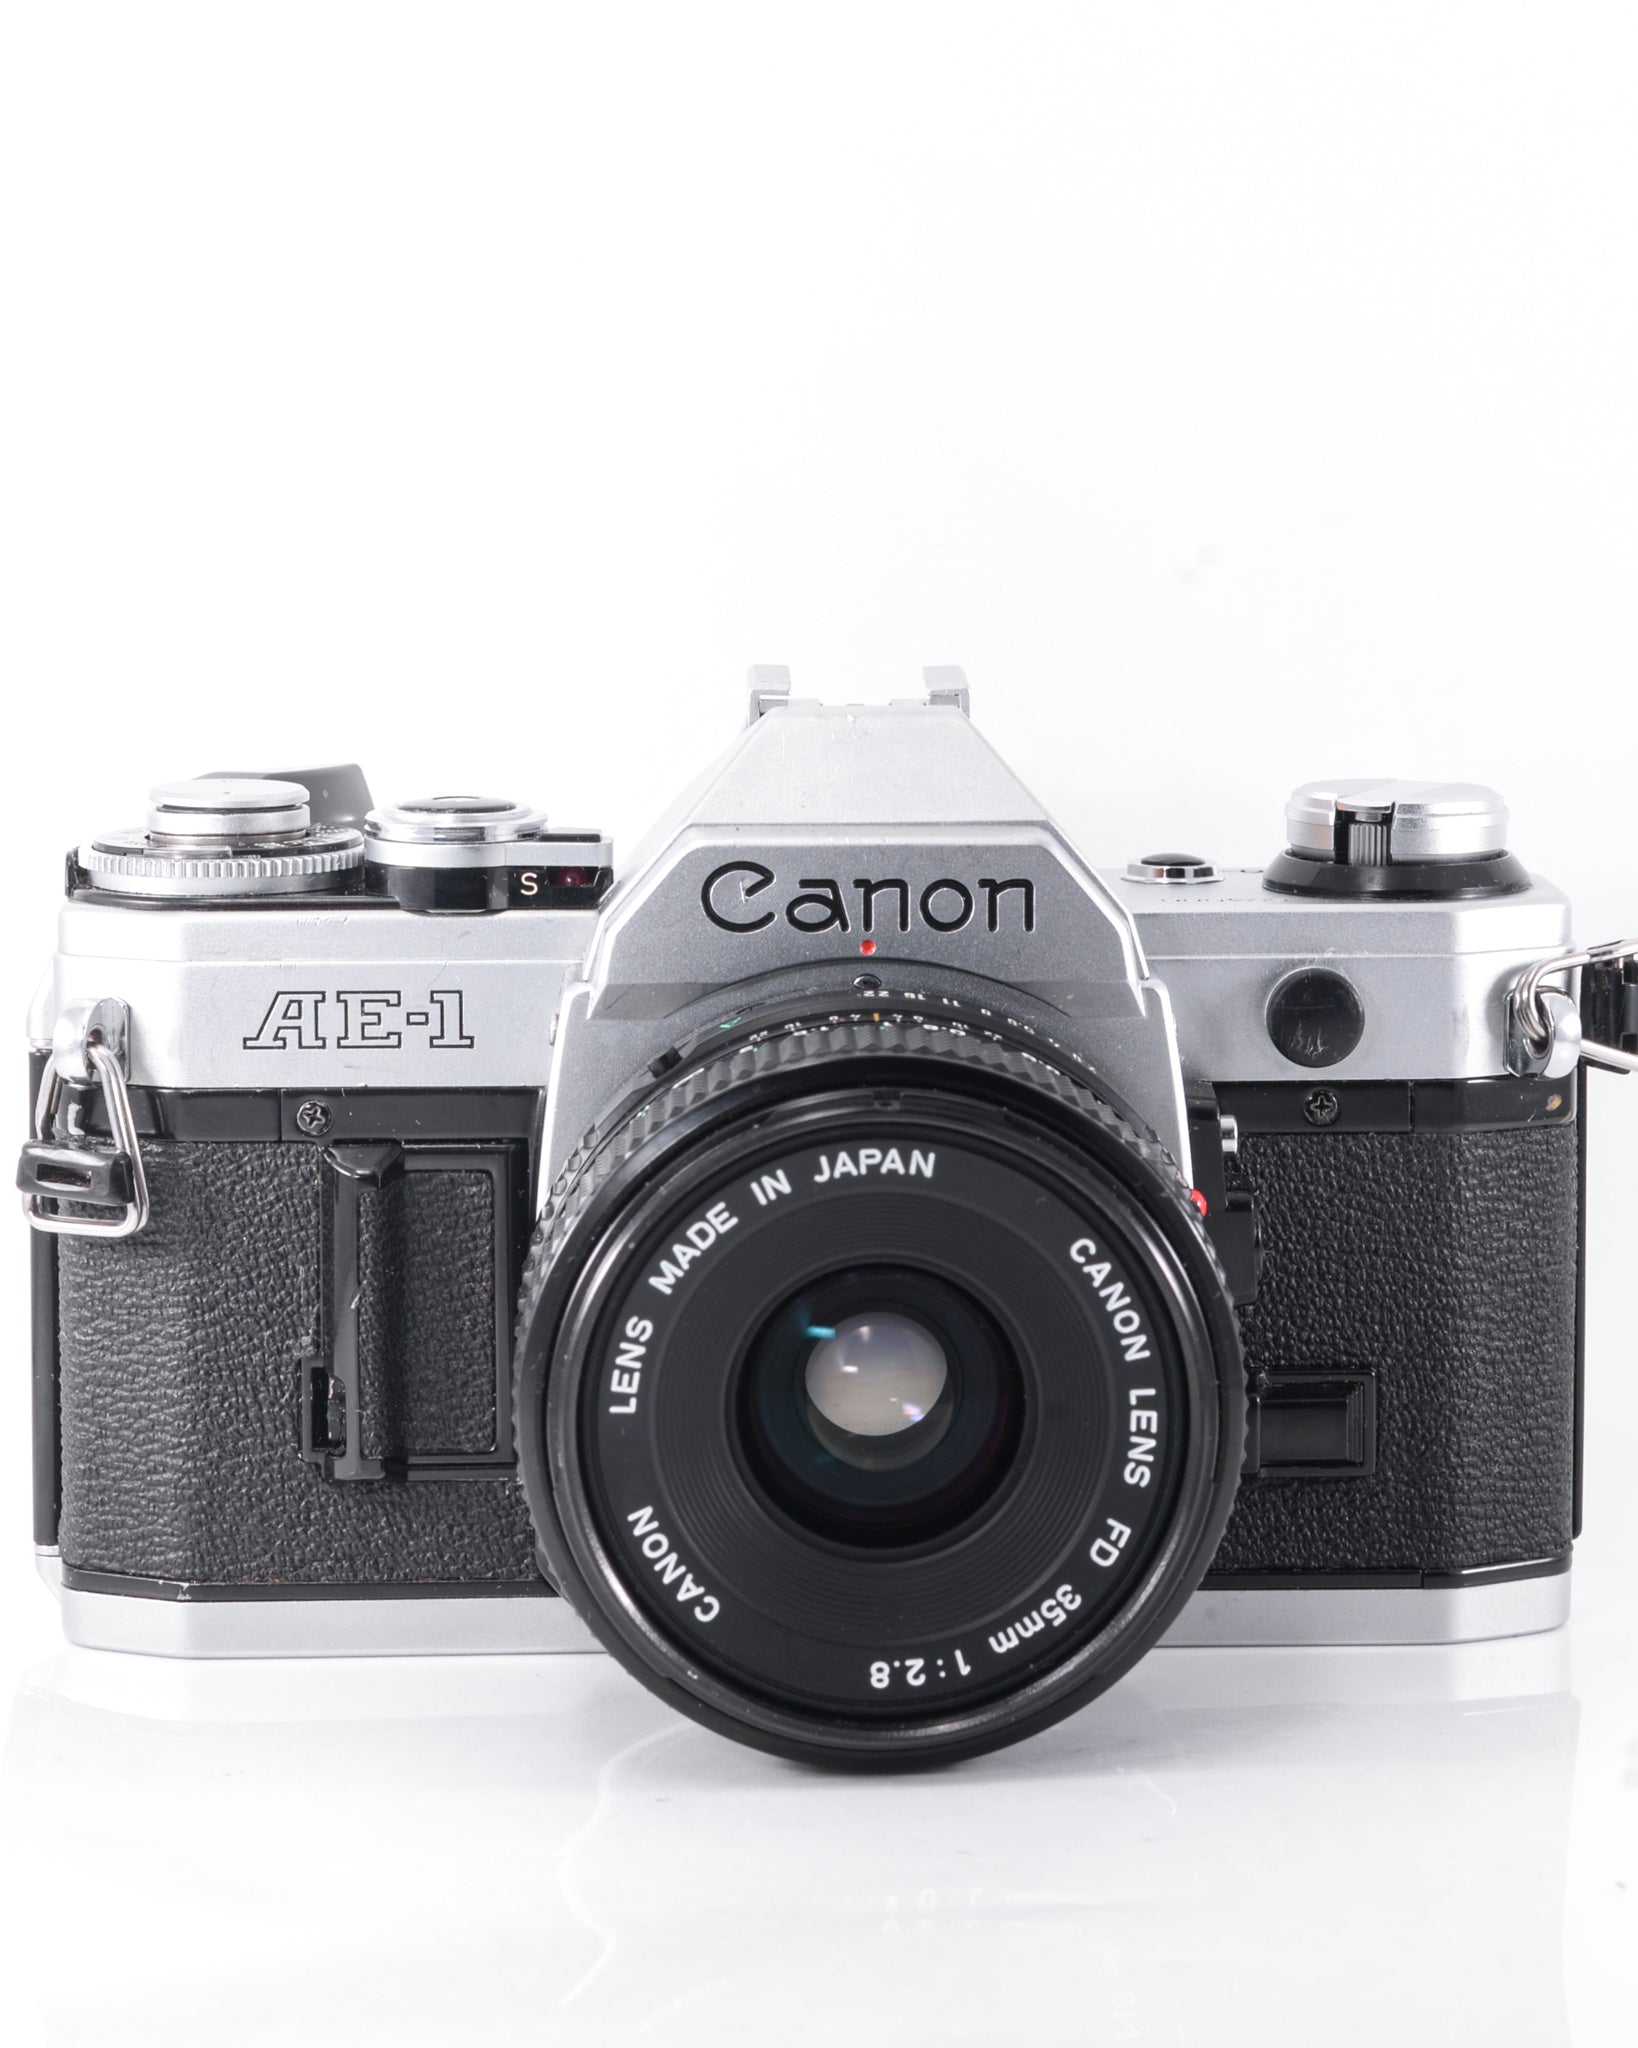 Canon AE-1 35mm SLR film camera with 35mm f2.8 lens